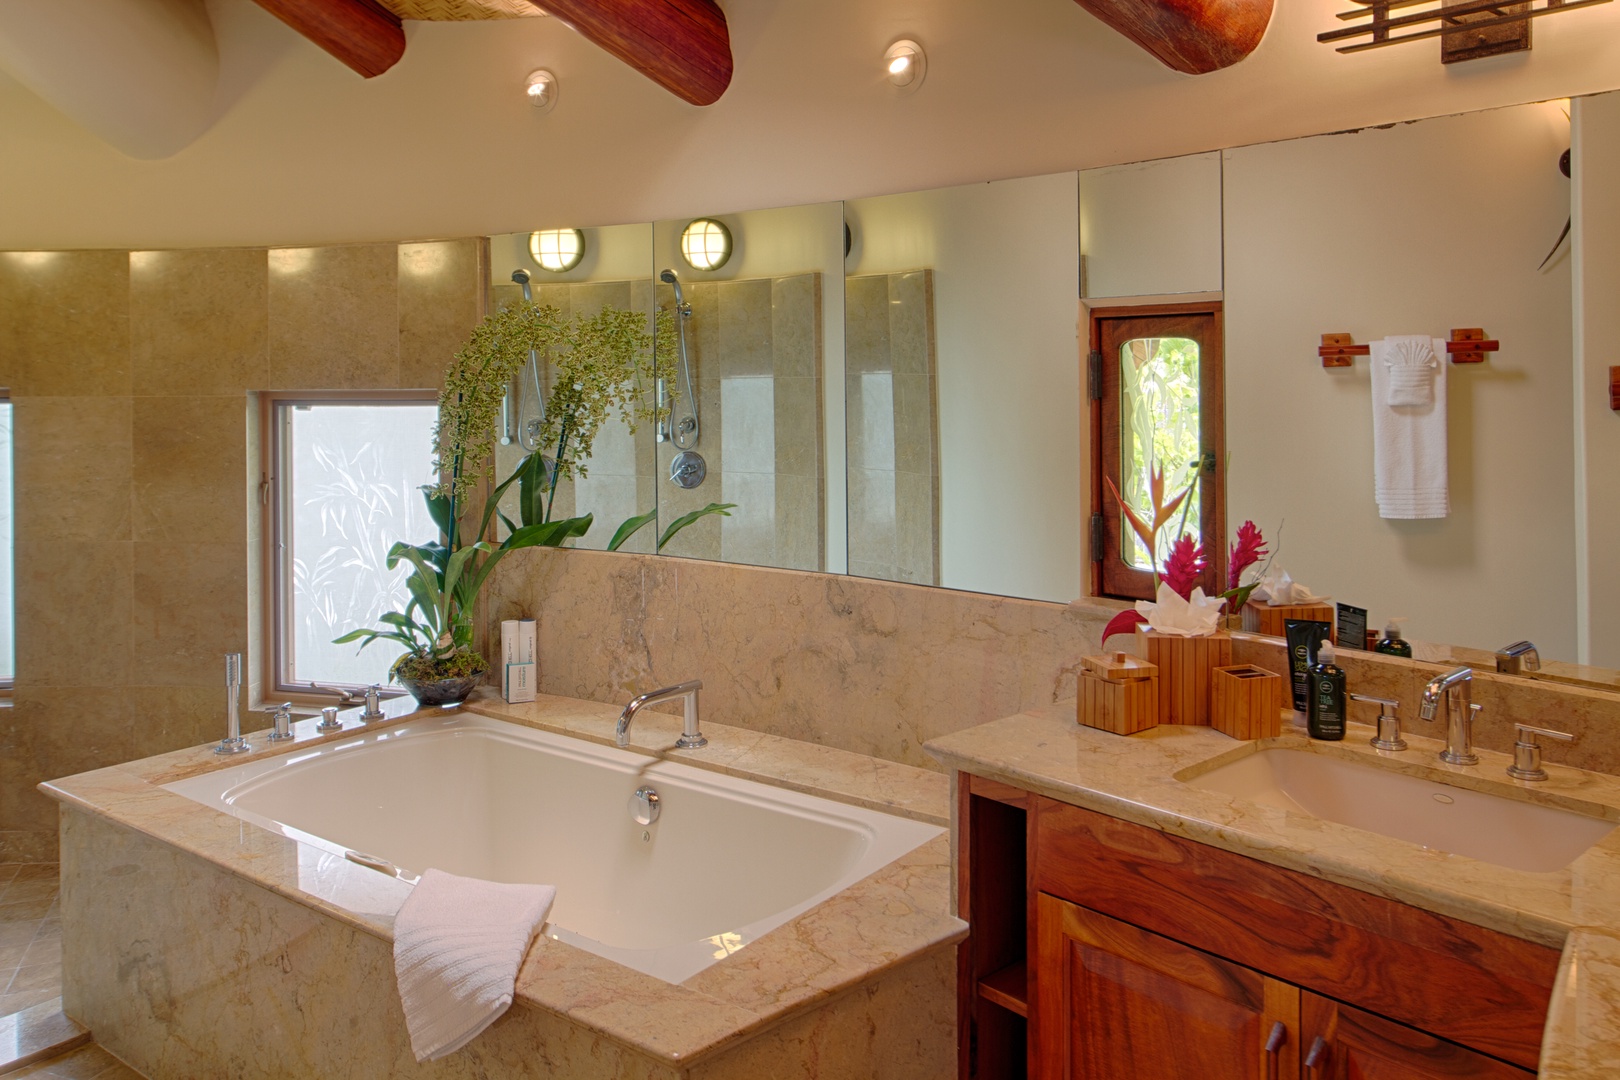 Kailua Vacation Rentals, Paul Mitchell Estate* - Primary Bath in Main House